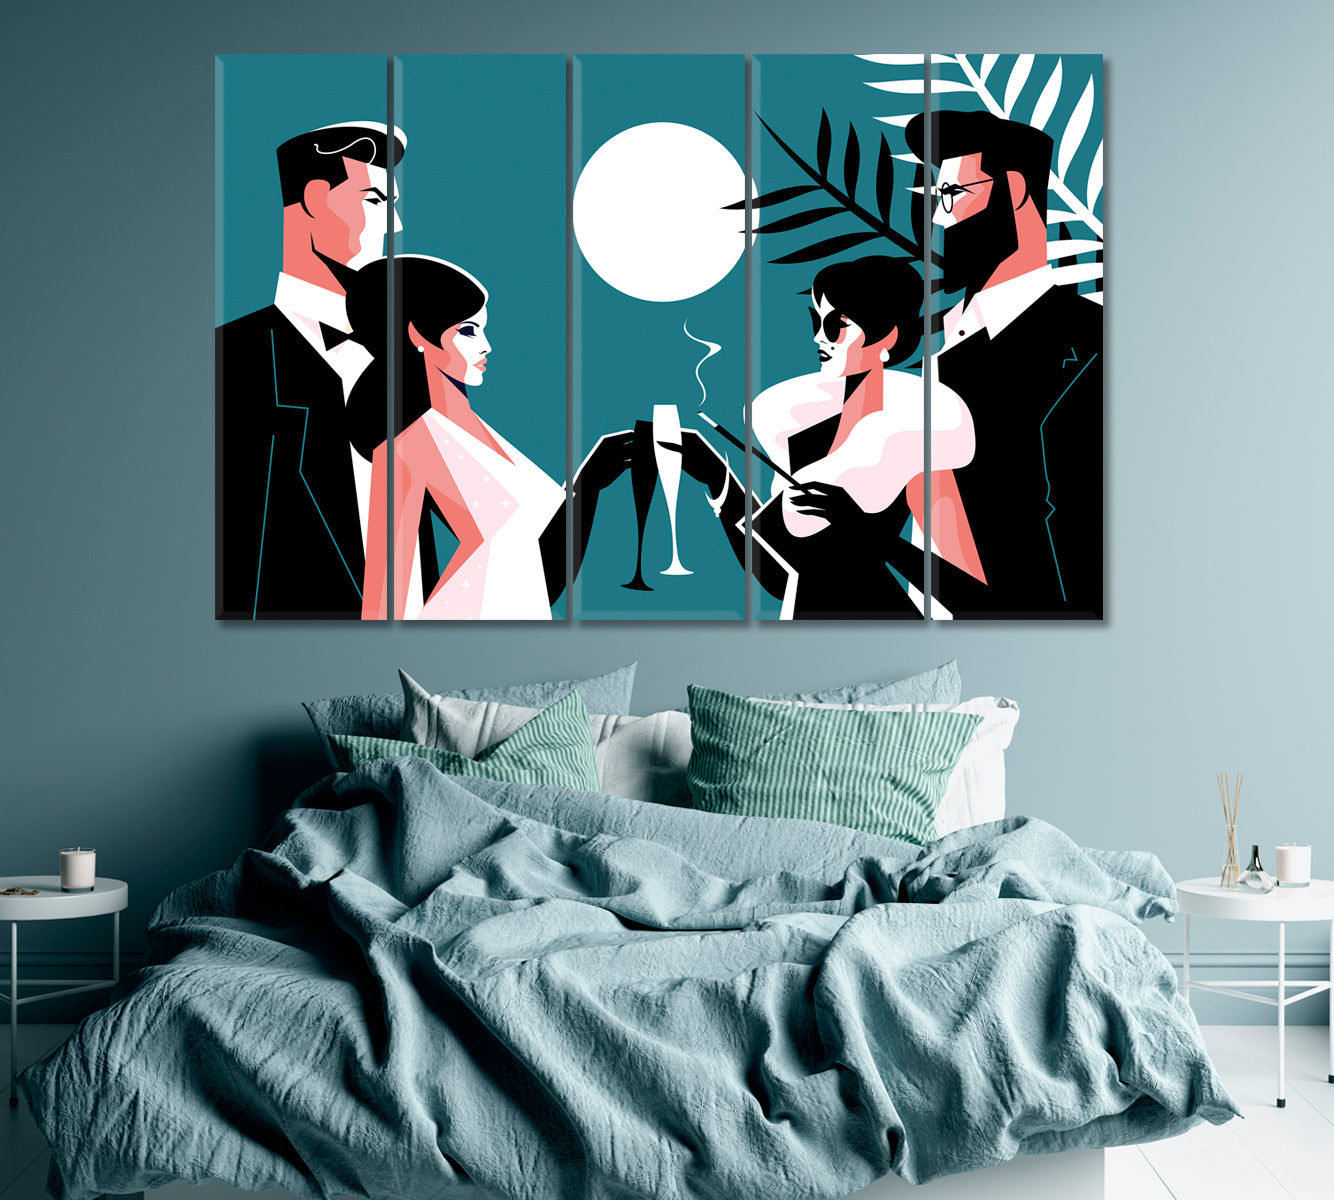 Elegant Couples at Fashion Night Party Canvas Print ArtLexy 5 Panels 36"x24" inches 